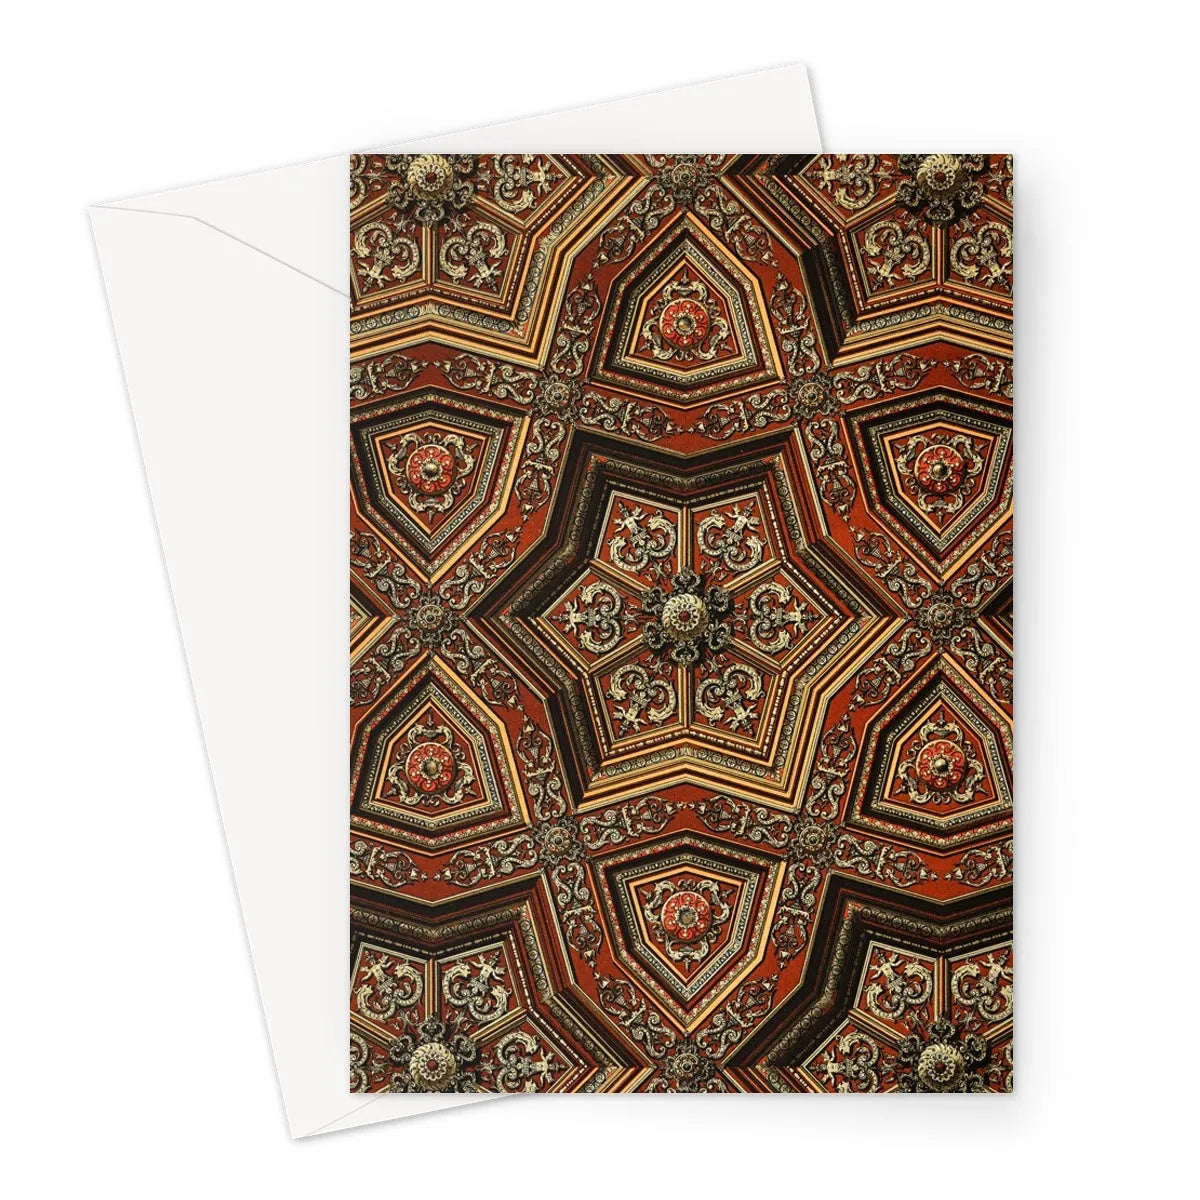 Renaissance Pattern By Auguste Racinet Greeting Card - A5 Portrait / 1 Card - Greeting & Note Cards - Aesthetic Art